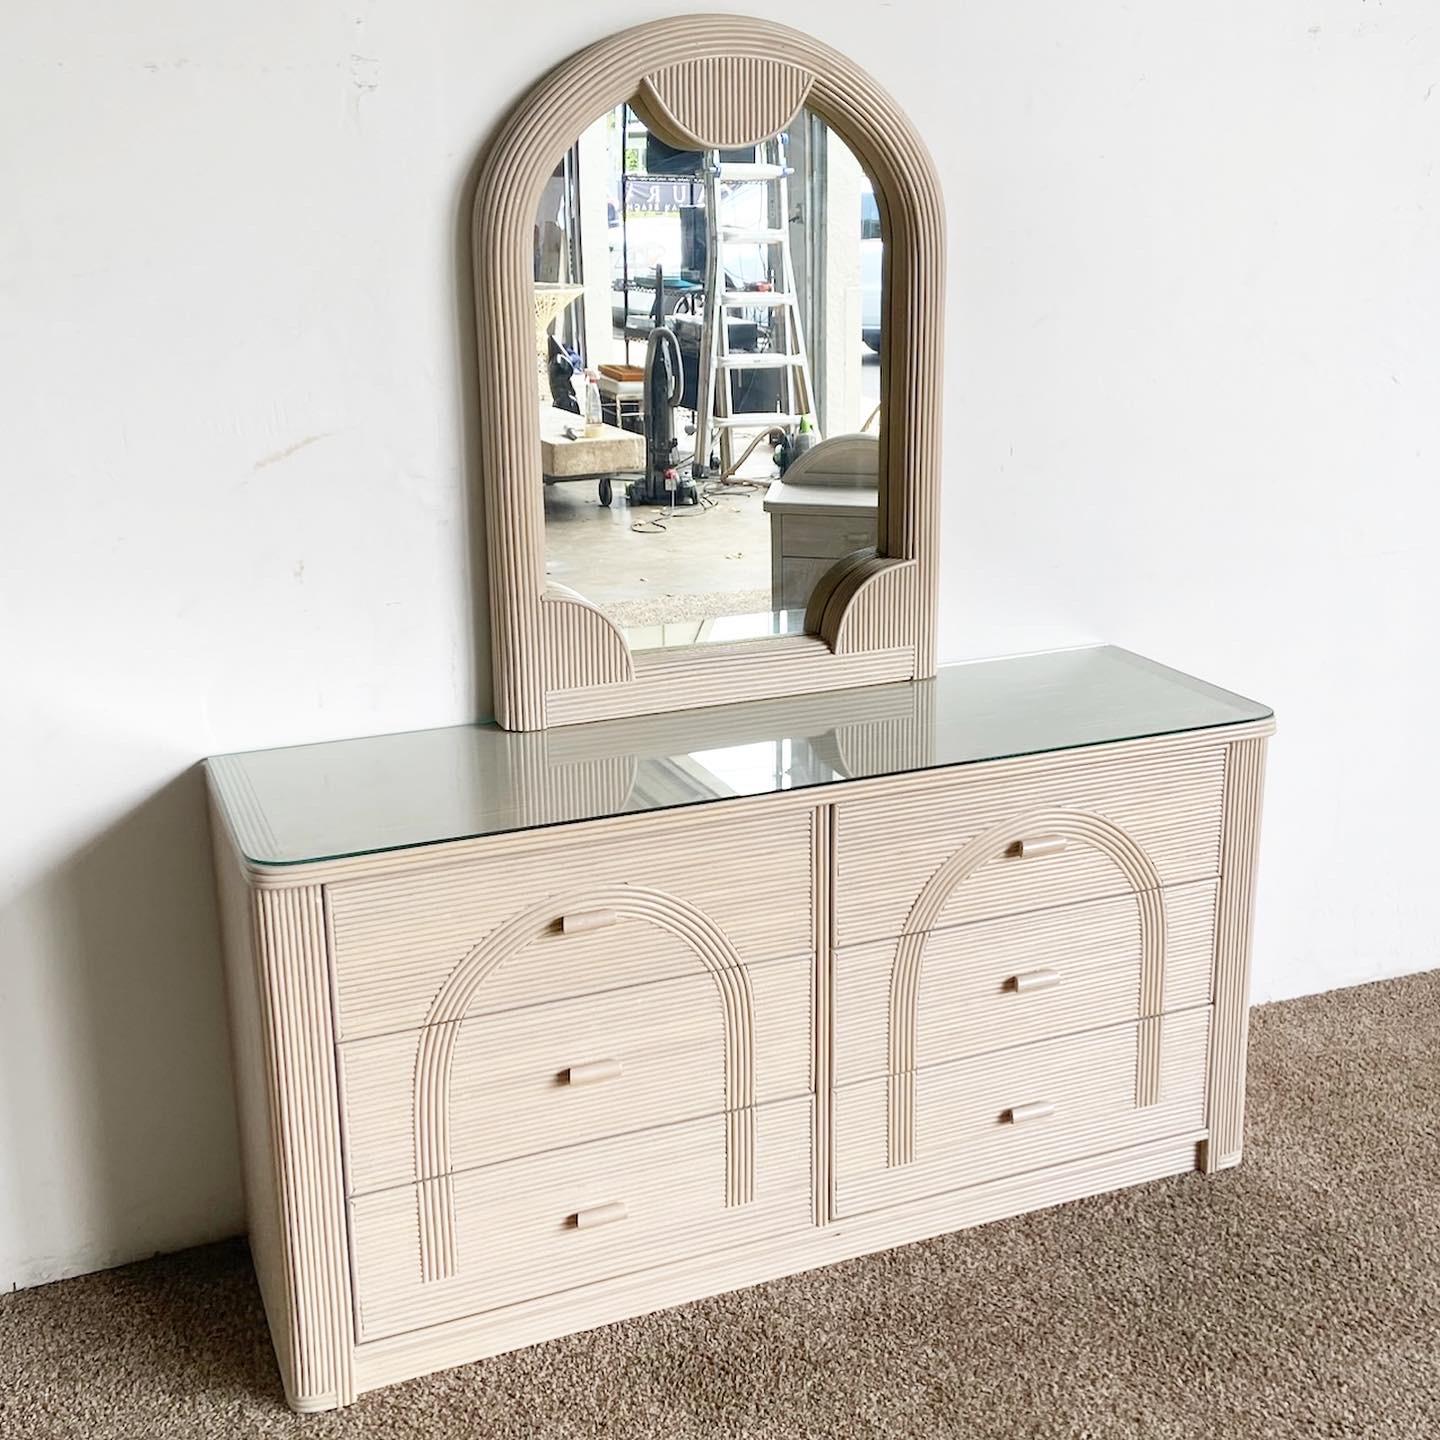 Enhance your bedroom with this magical vintage Boho Chic Dresser and Mirror set, boasting intricate Pencil Reed detailing. The mirror measures 29”W x 2.5”D x 39.25”H, offering a generous reflection space.

Dresser and mirror set featuring a vintage